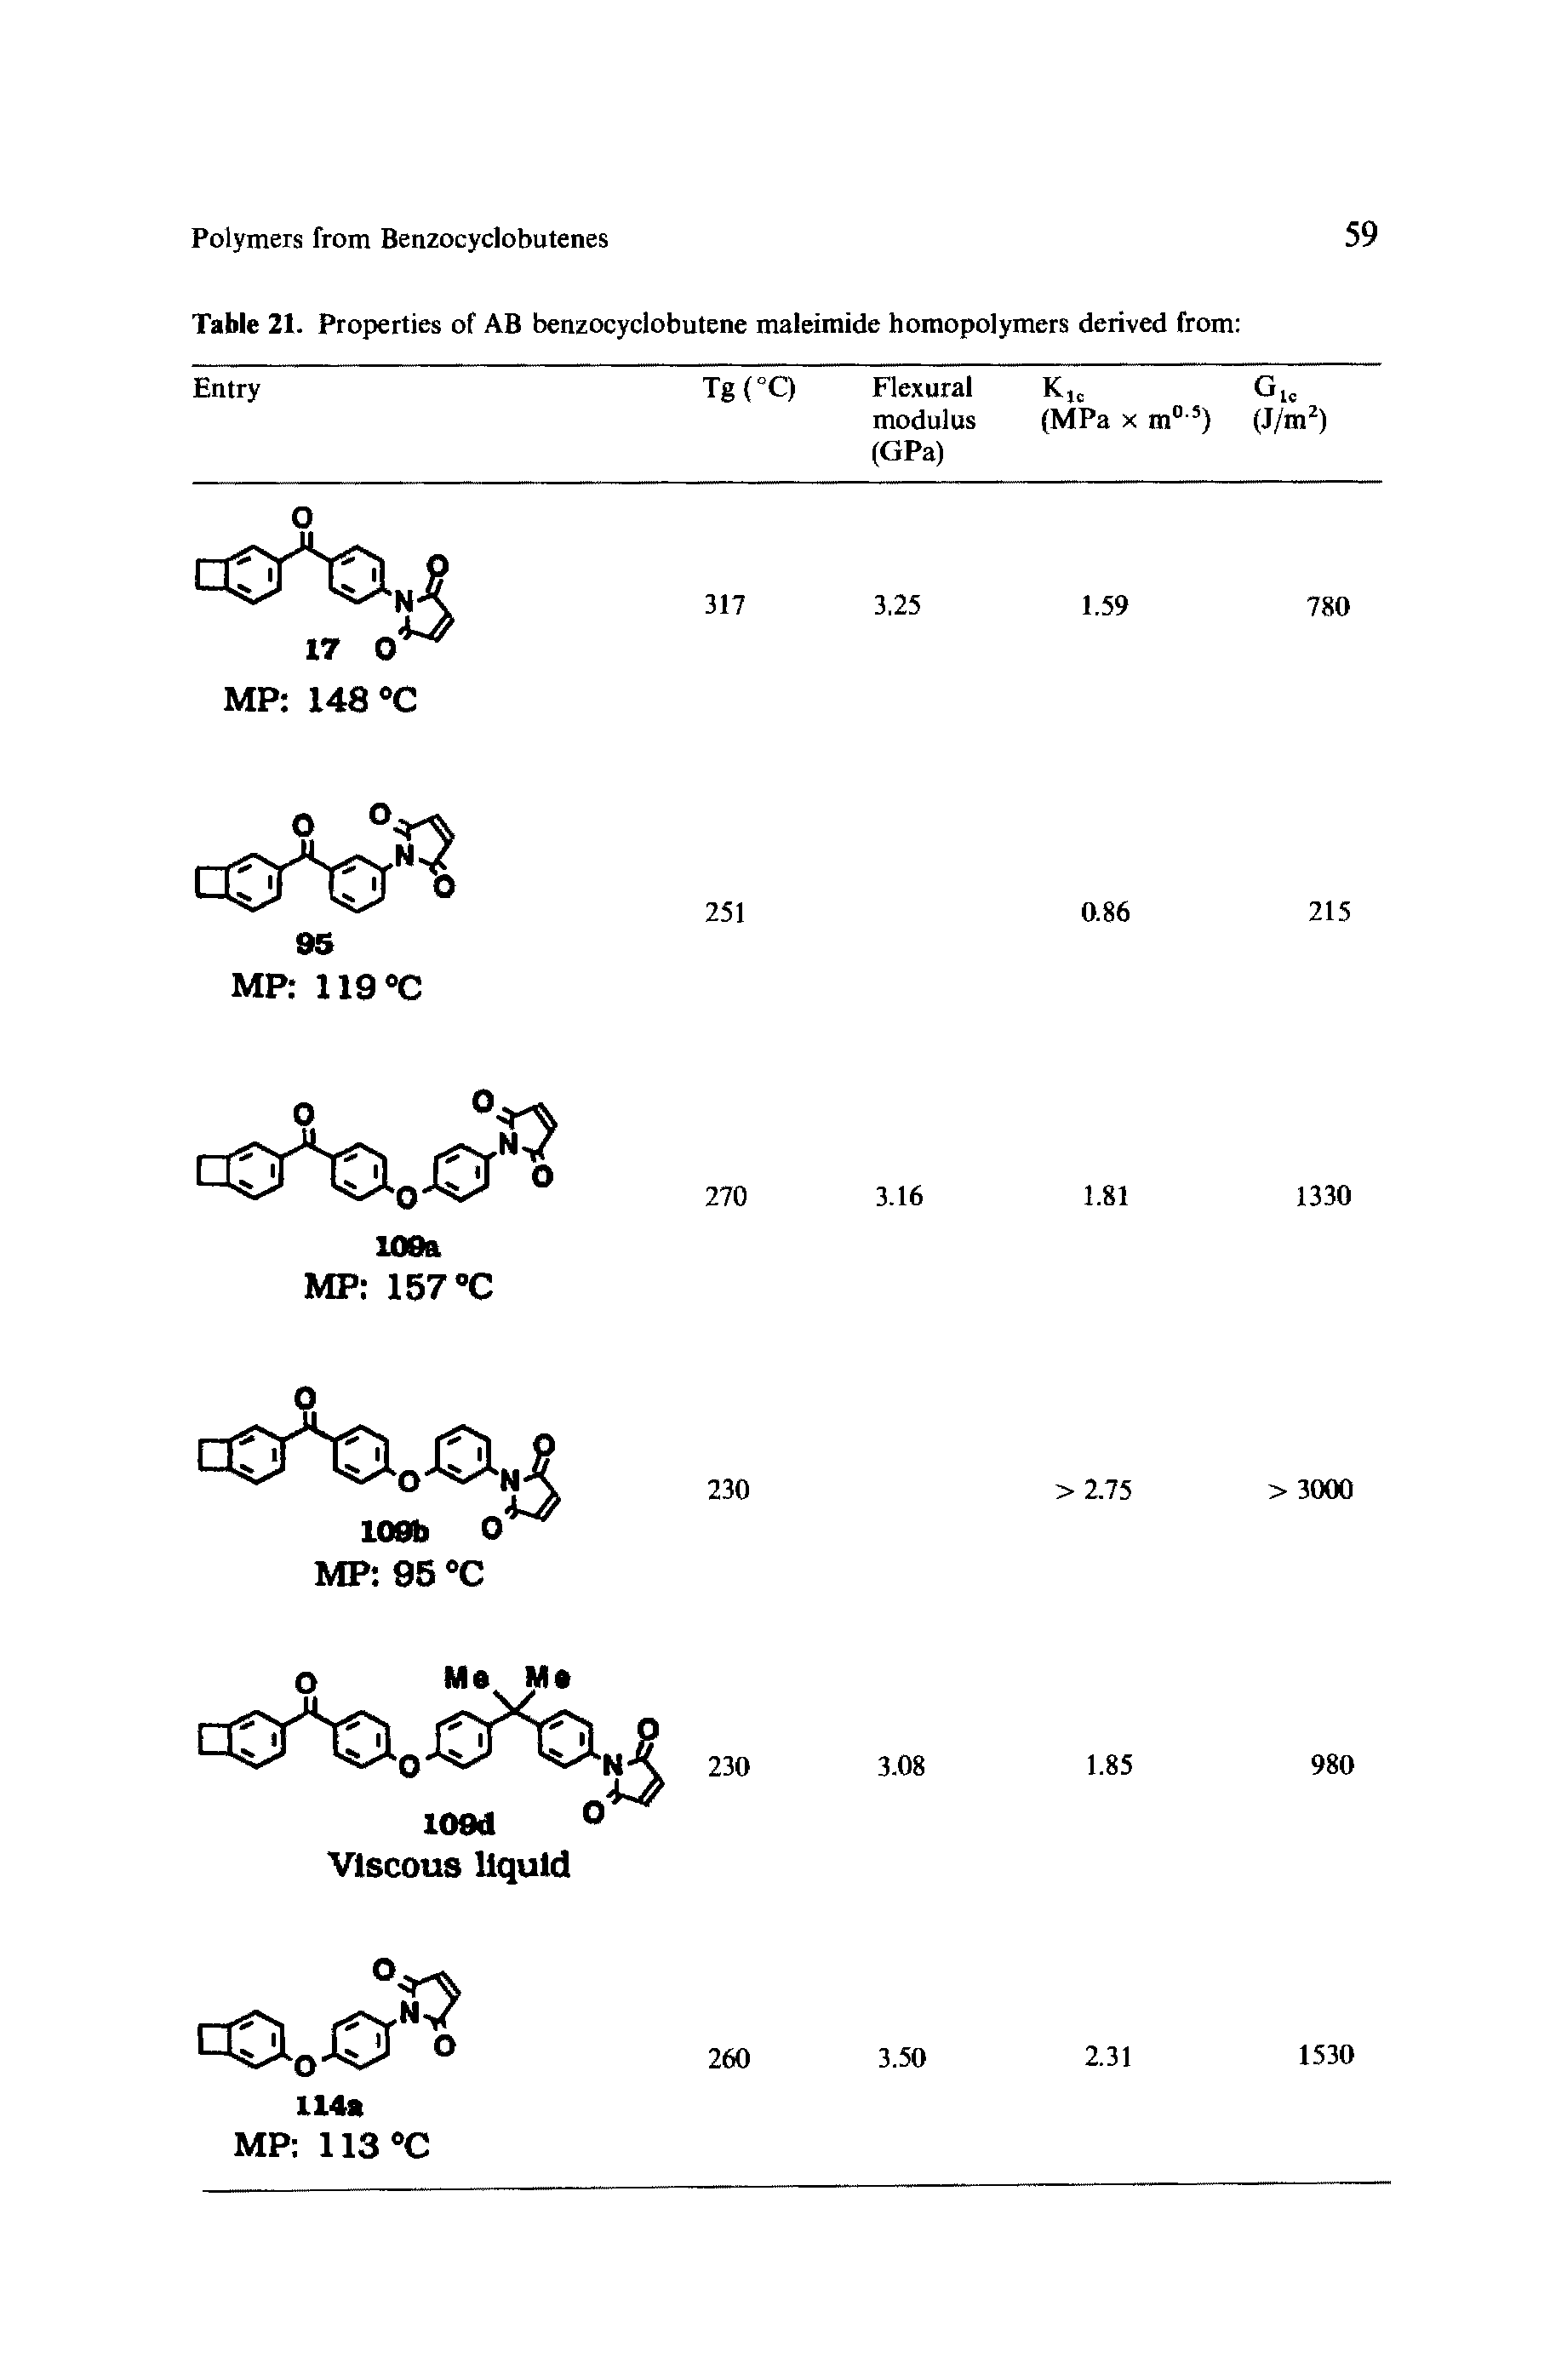 Table 21. Properties of AB benzocyclobutene maleimide homopolymers derived from ...